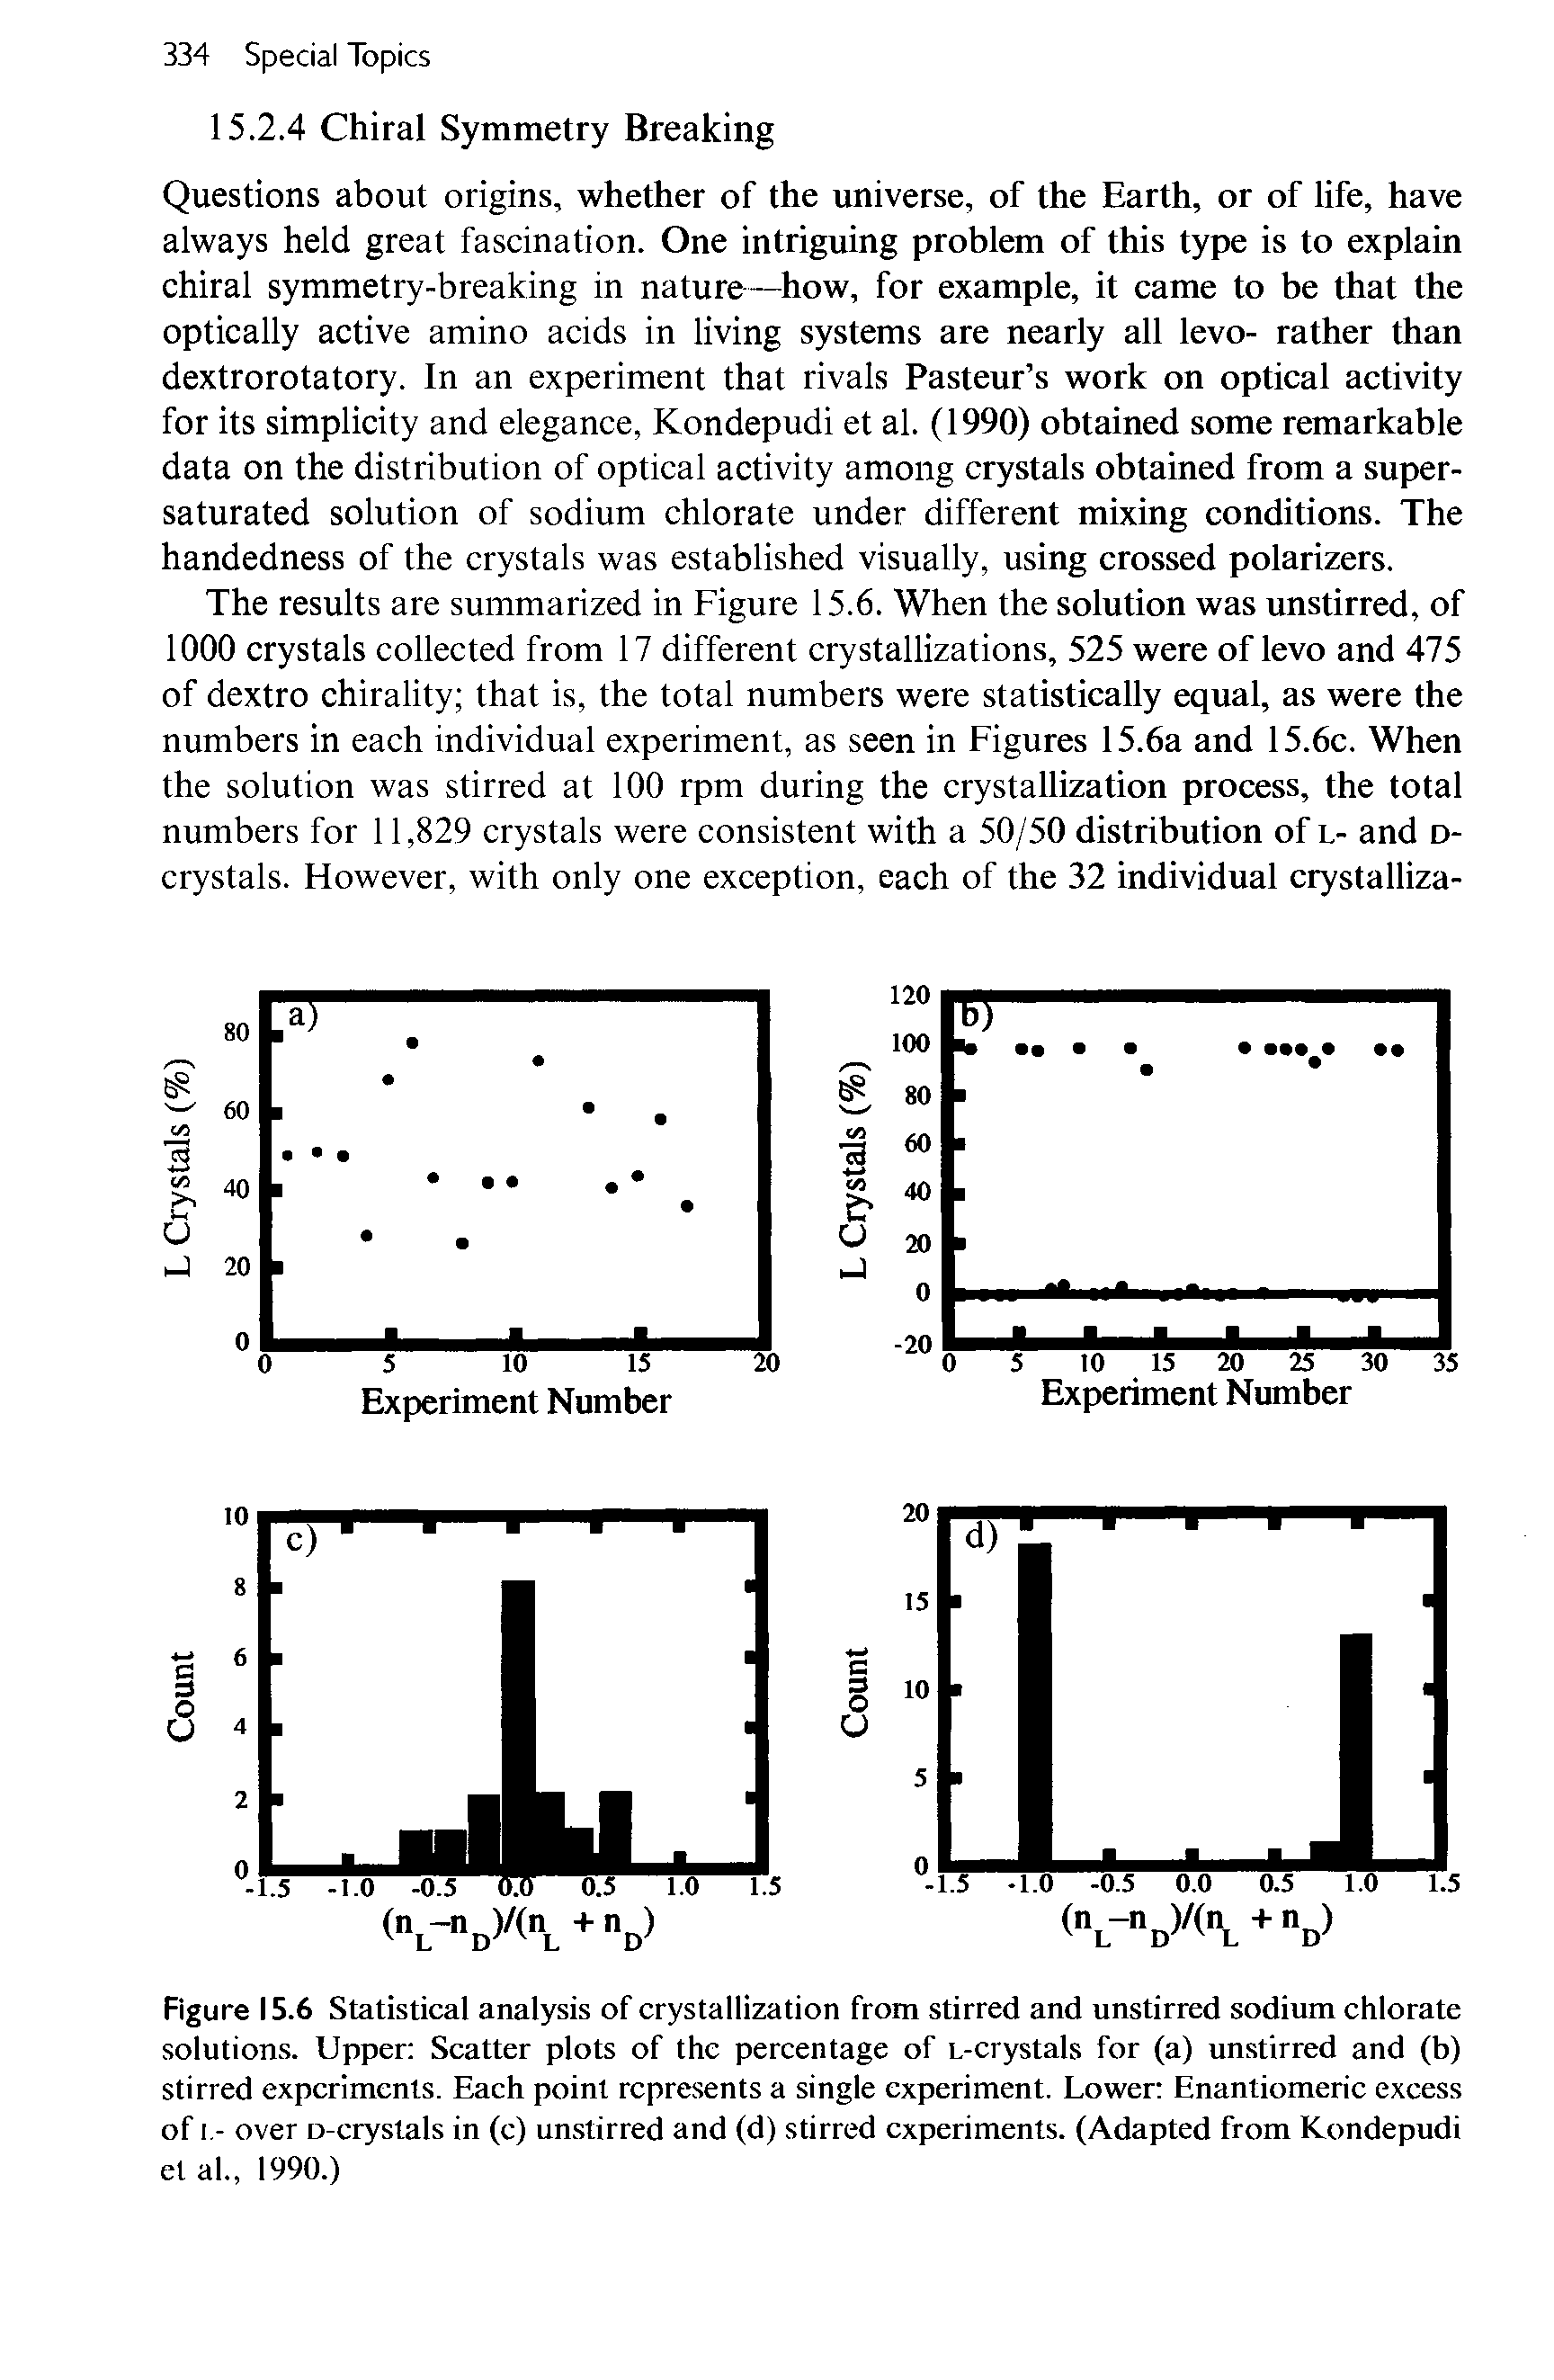 Figure 15.6 Statistical analysis of crystallization from stirred and unstirred sodium chlorate solutions. Upper Scatter plots of the percentage of L-crystals for (a) unstirred and (b) stirred experiments. Each point represents a single experiment. Lower Enantiomeric excess of 1- over D-crystals in (c) un.stirred and (d) stirred experiments. (Adapted from Kondepudi el al., 1990.)...